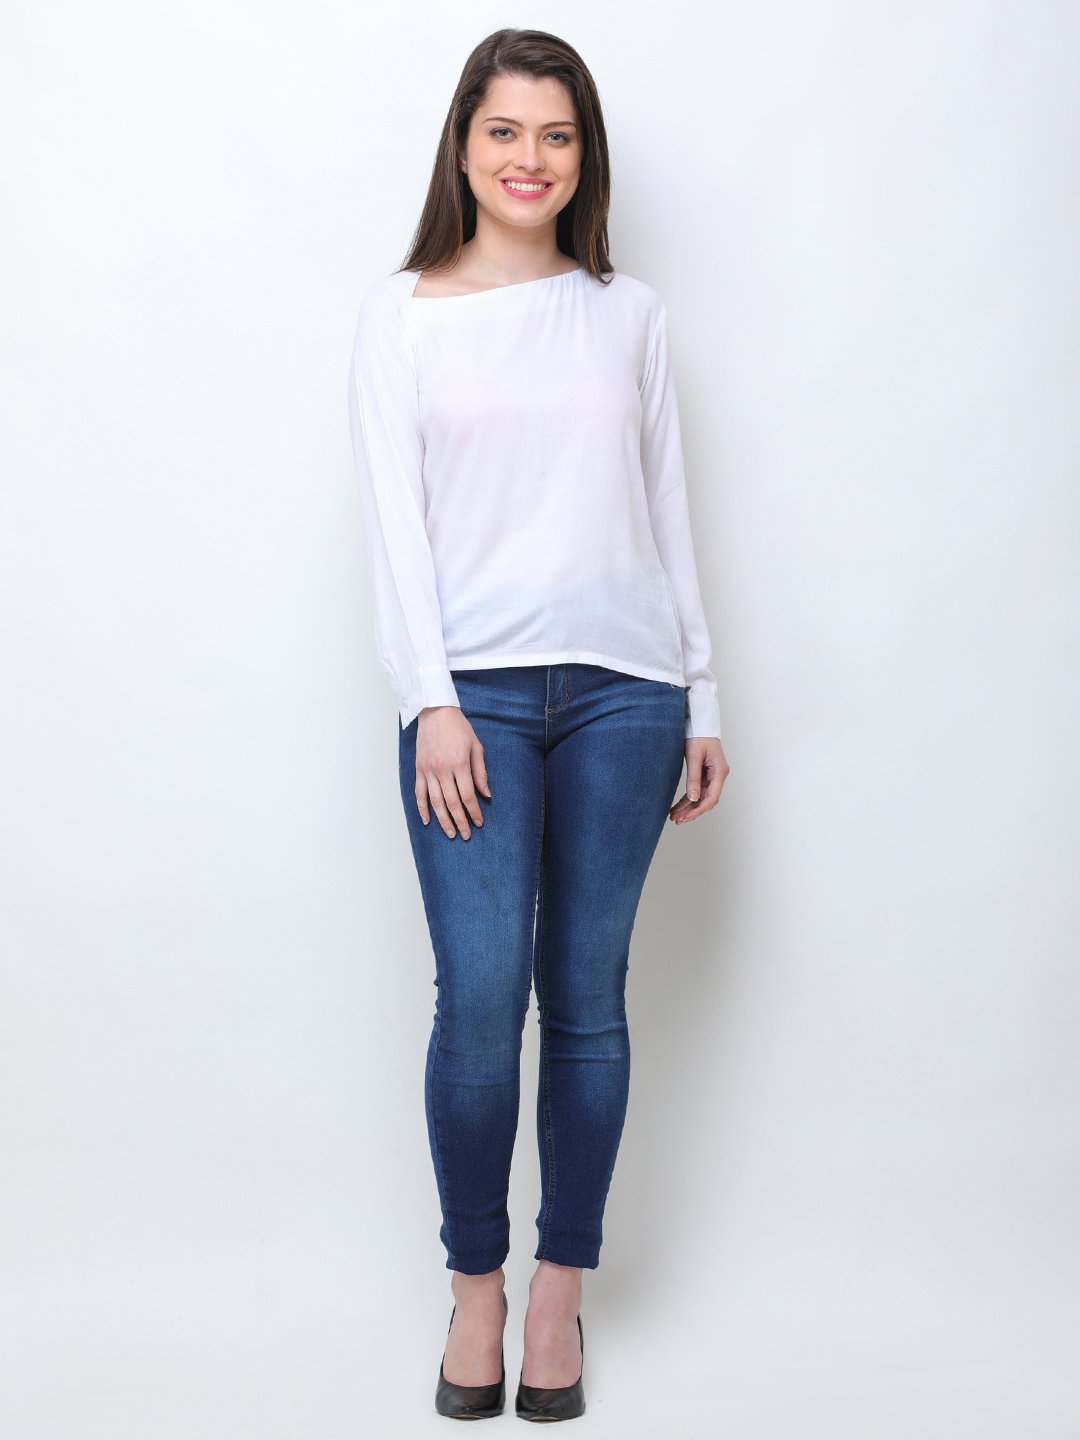 SCORPIUS WHITE RAYON STYLED NECK TOP